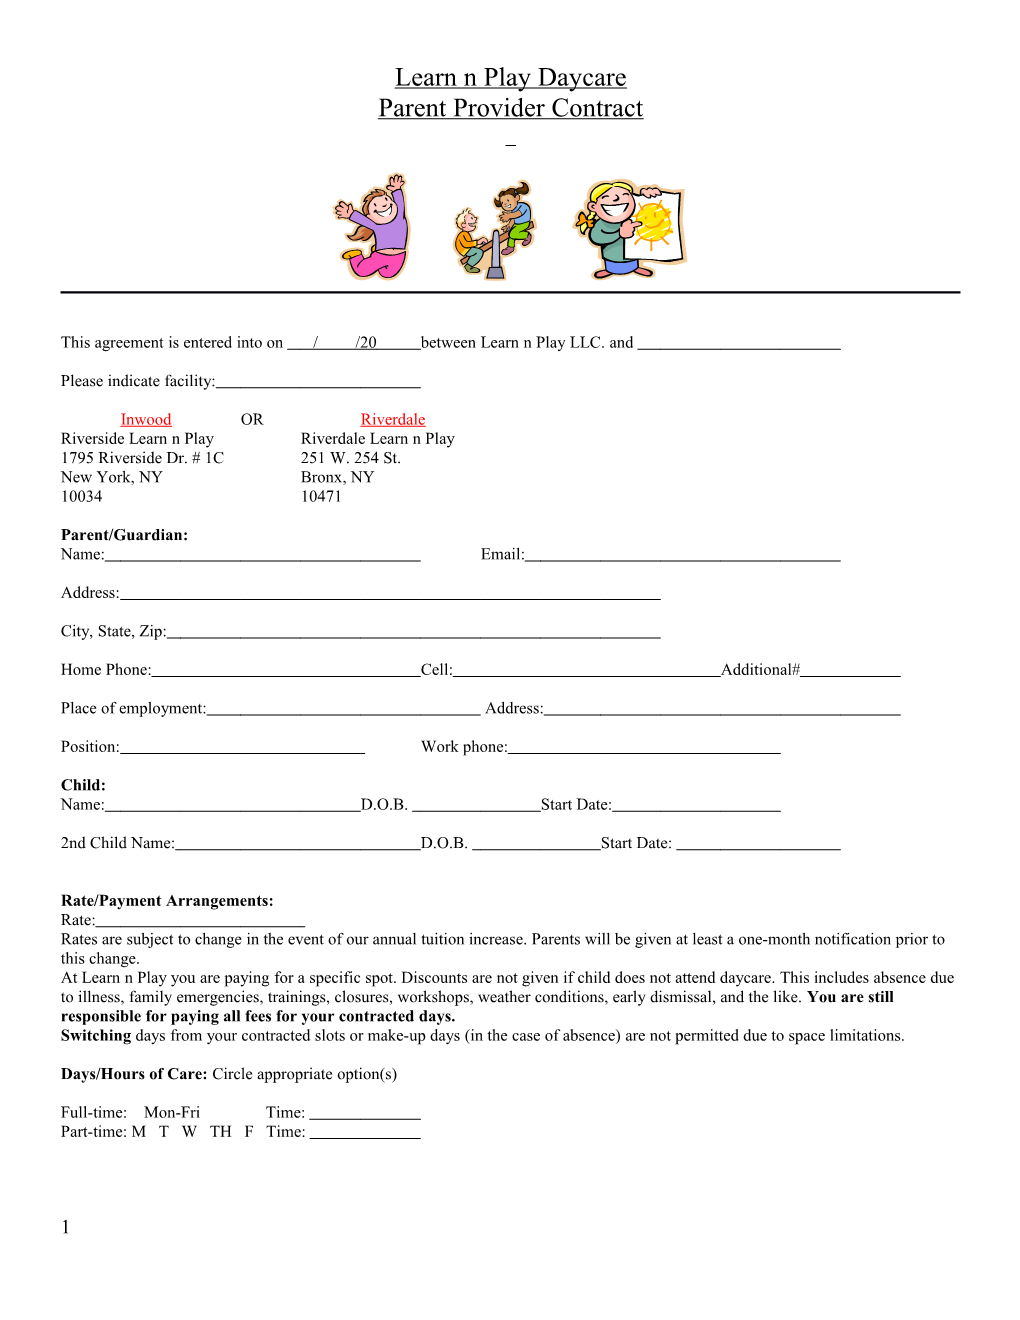 This Agreement Is Entered Into on / /20 Between Learn N Play LLC. And